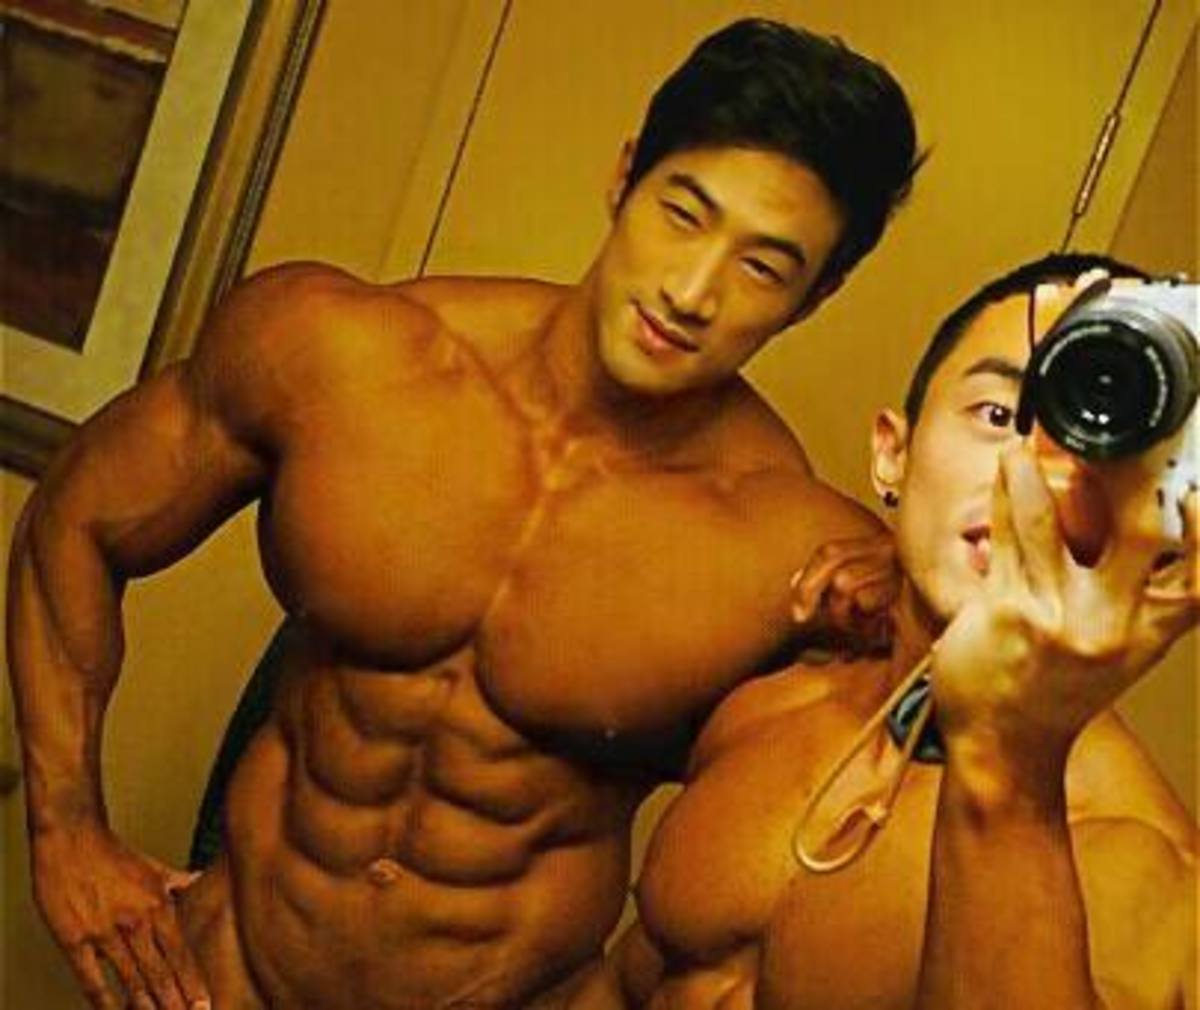 Hwang Chul Soon Korean Bodybuilder And Fitness Model HubPages.